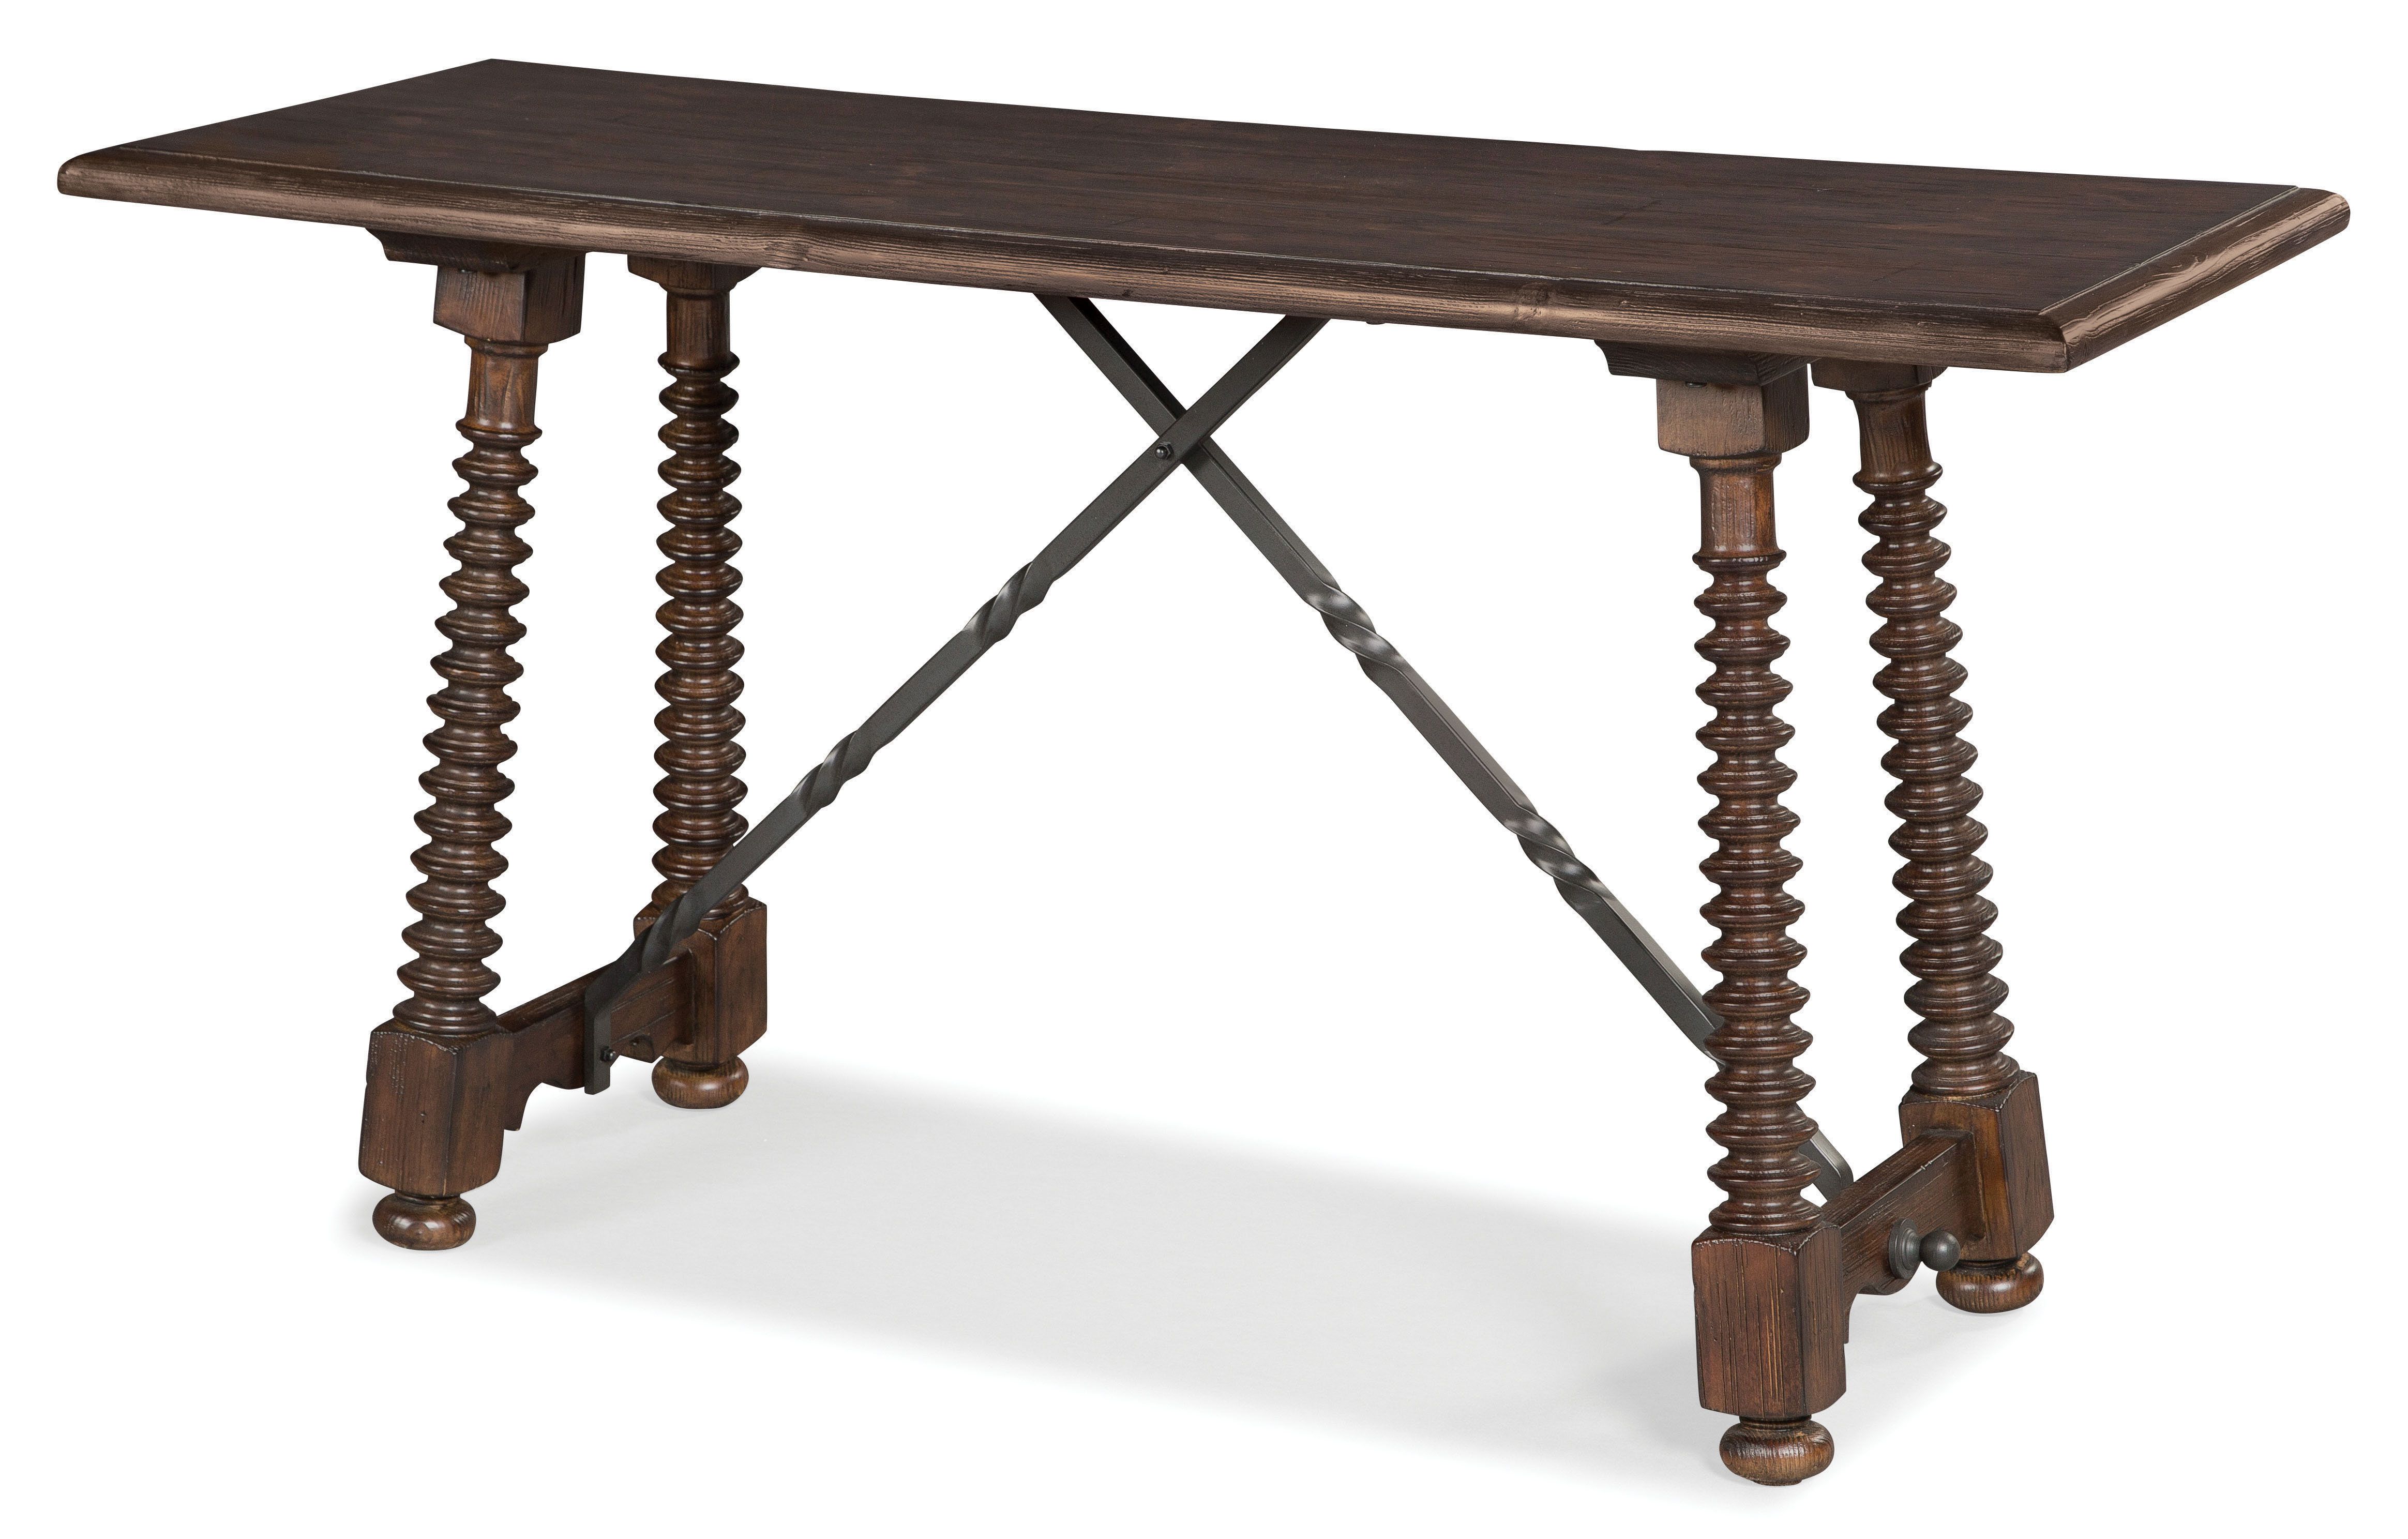 Console Tables | Perigold With Regard To Echelon Console Tables (View 18 of 20)